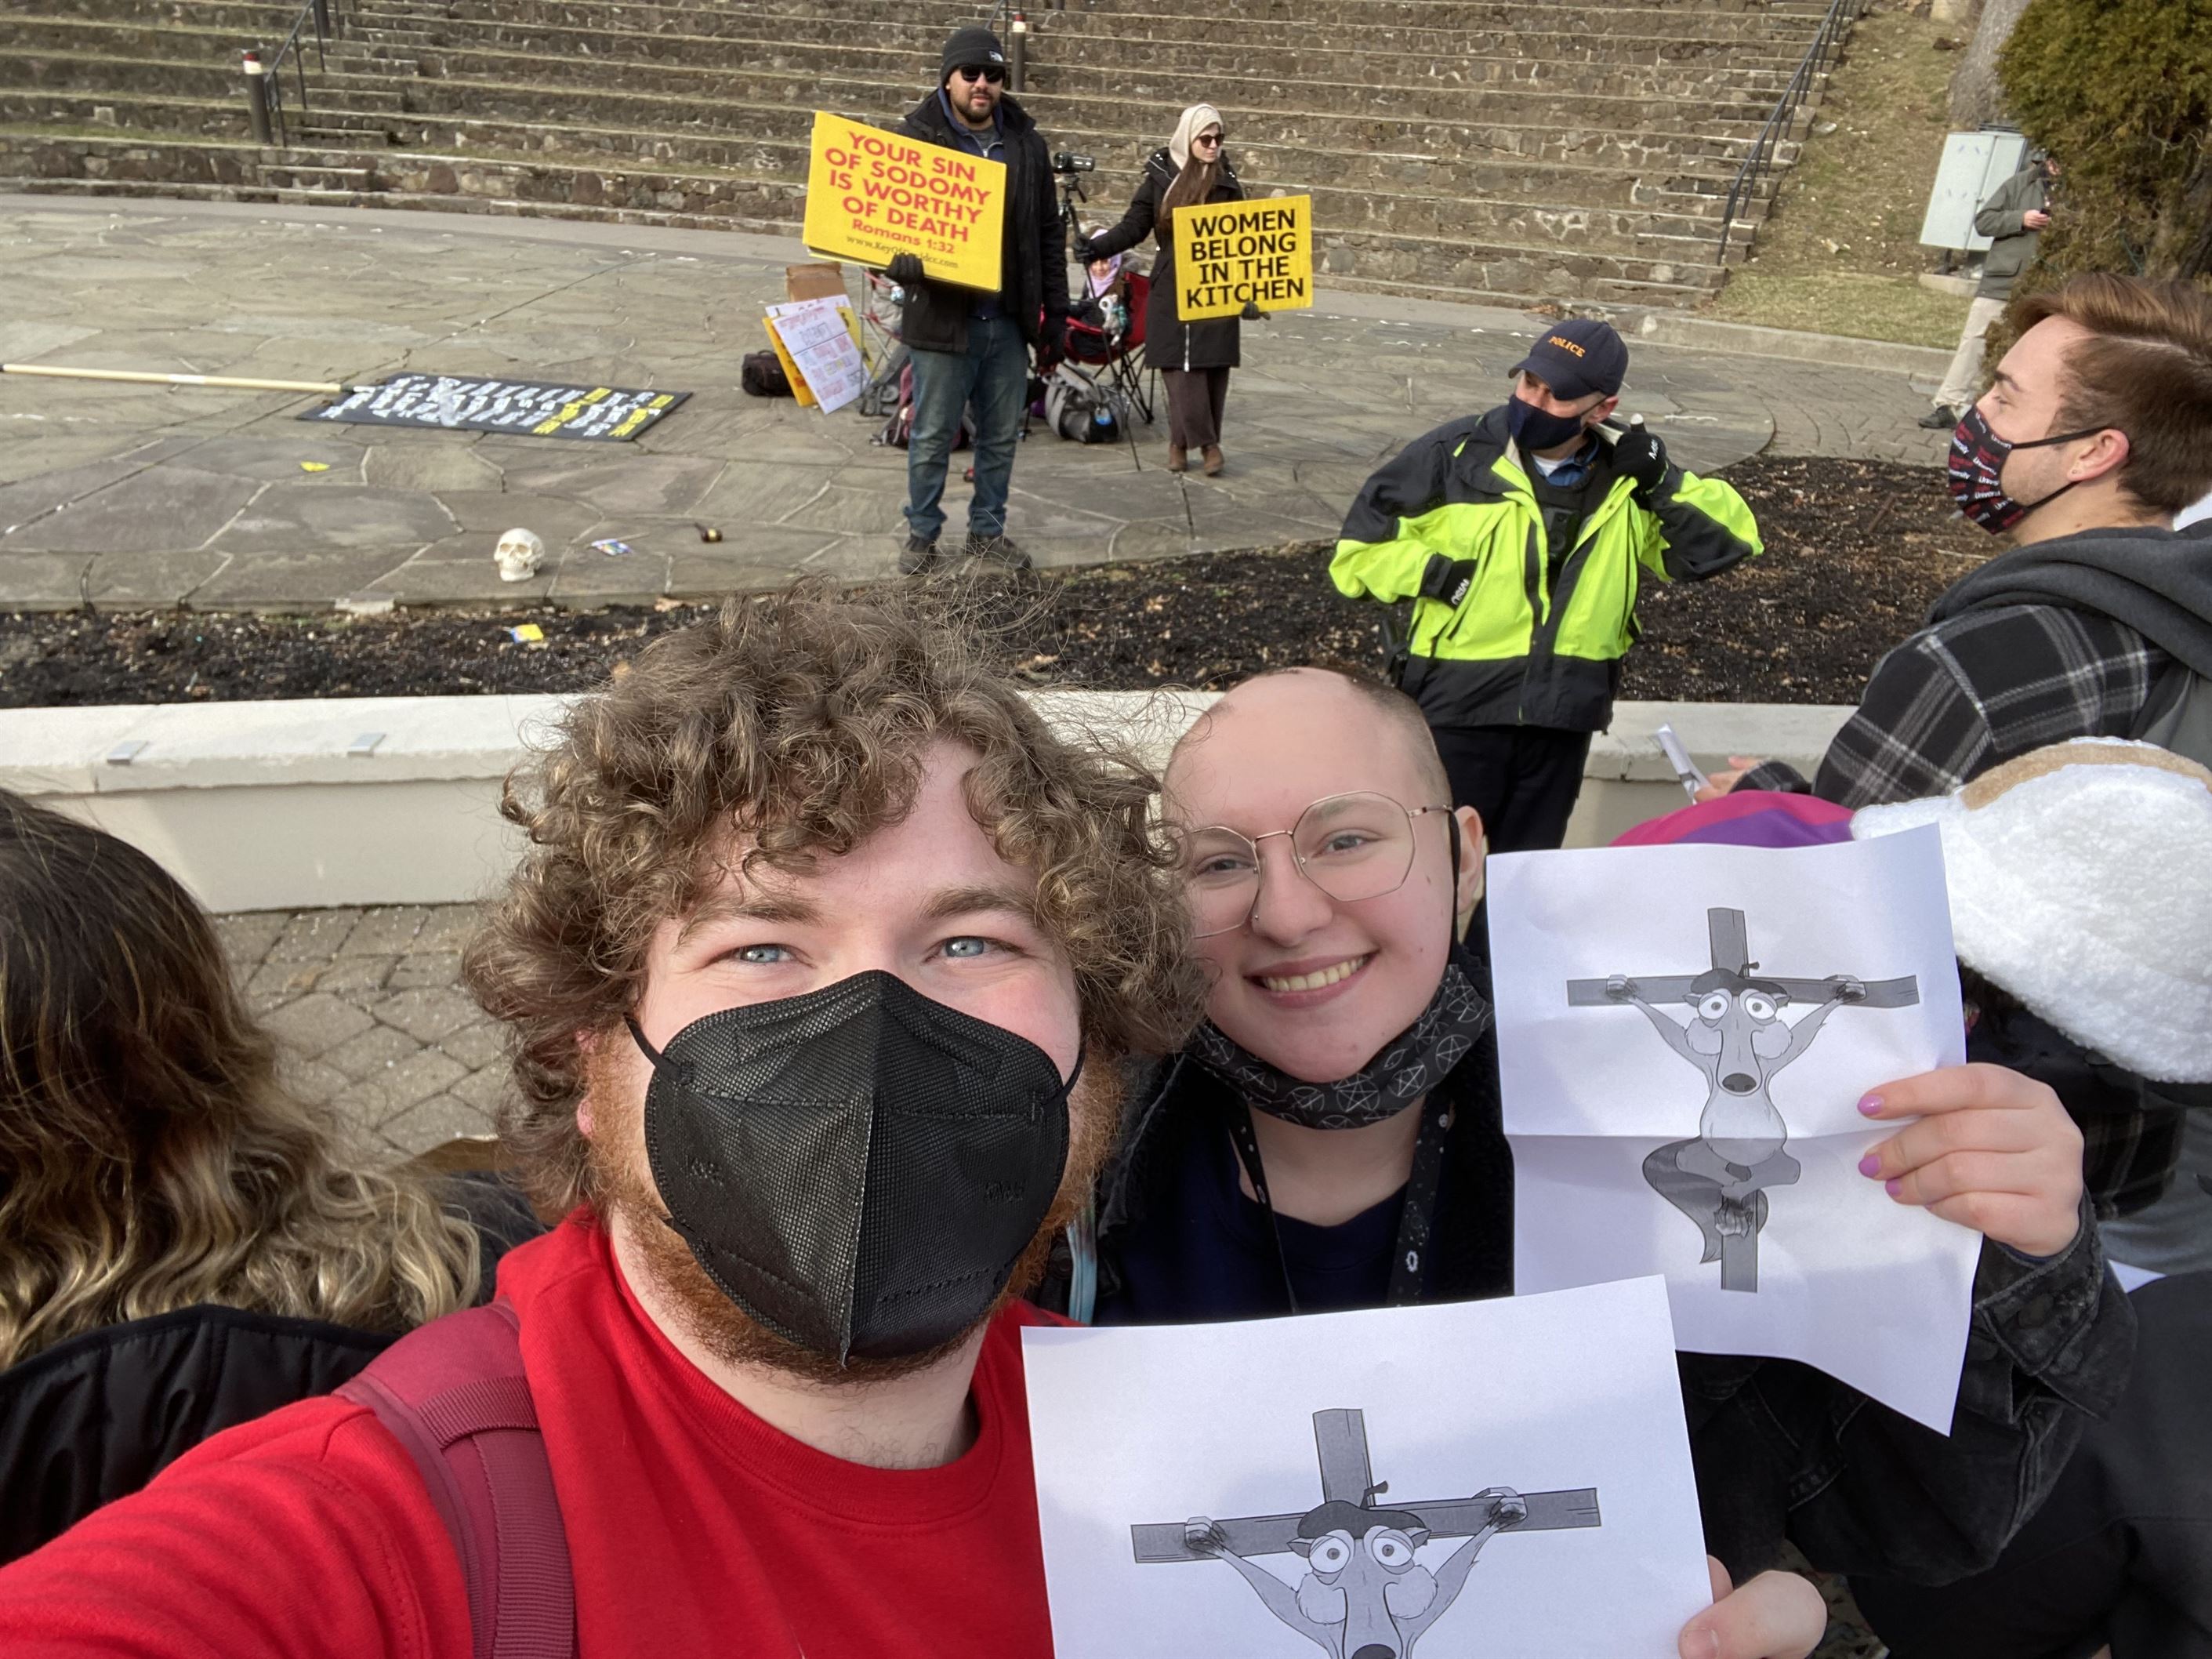 Colin Luderitz (left) and Sam Garofolo (right) holding up a picture of Scrat from “Ice Age” being crucified in front of the David Christian Center members. Photo courtesy of Colin Luderitz